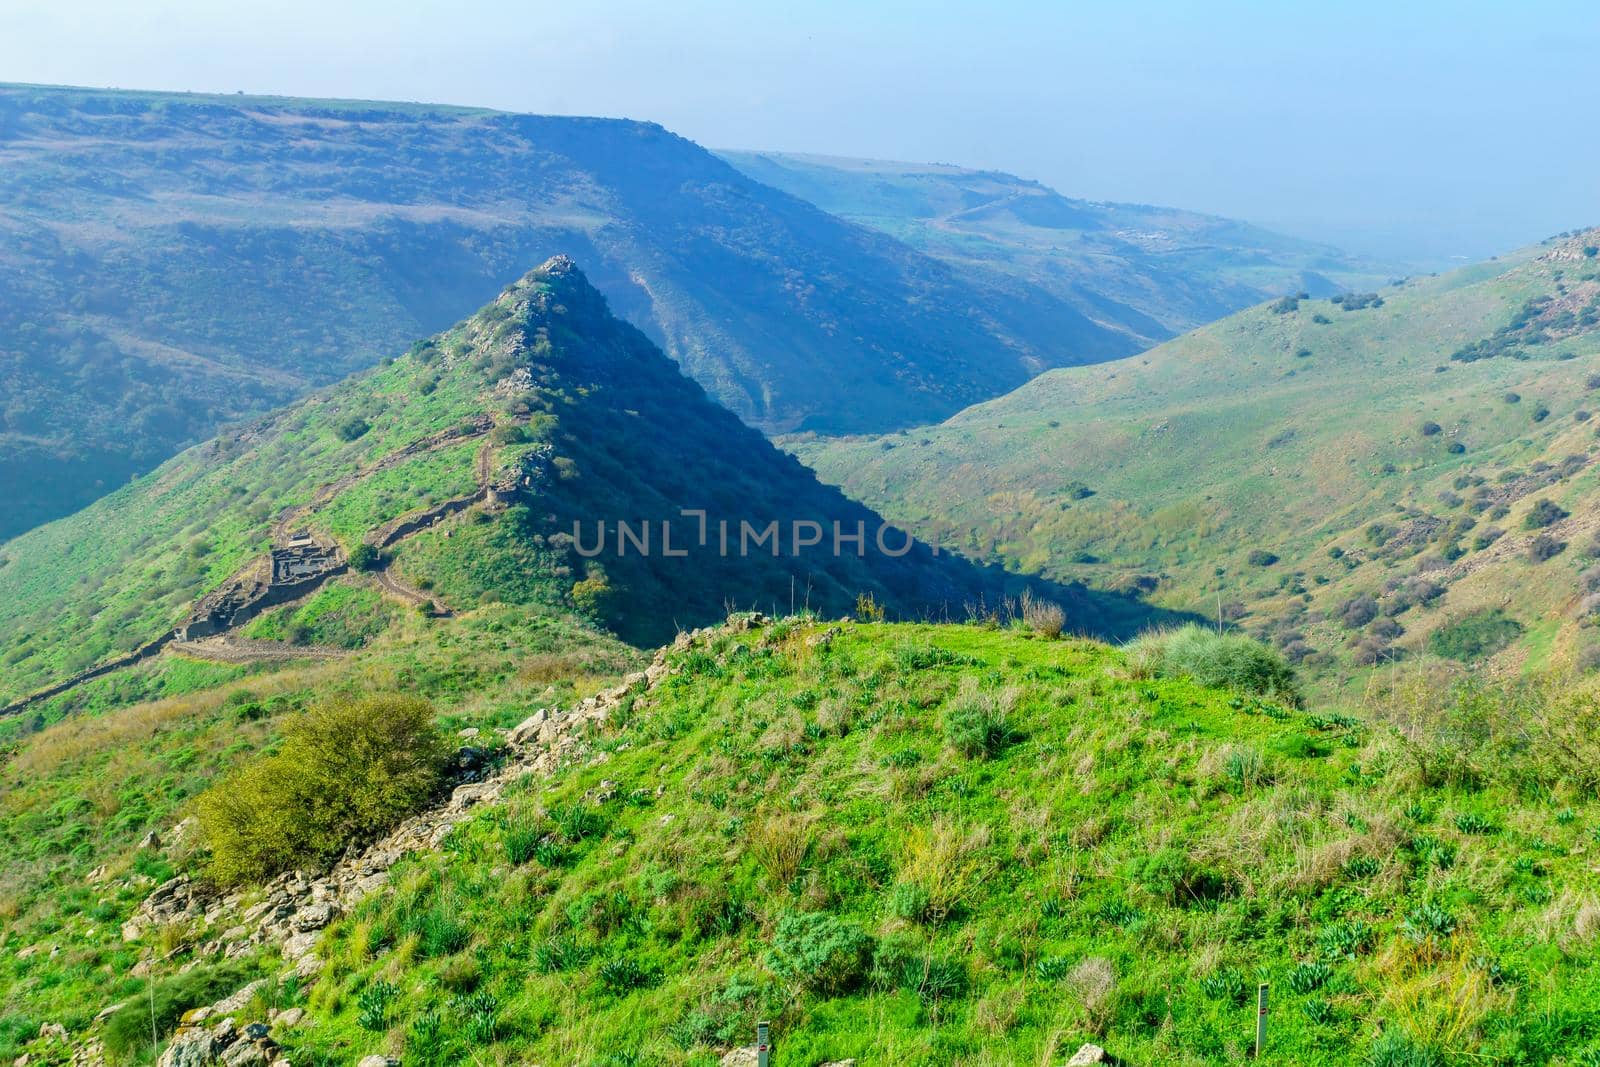 View of the Gamla fortress and nearby landscape. The Golan Heights, Northern Israel